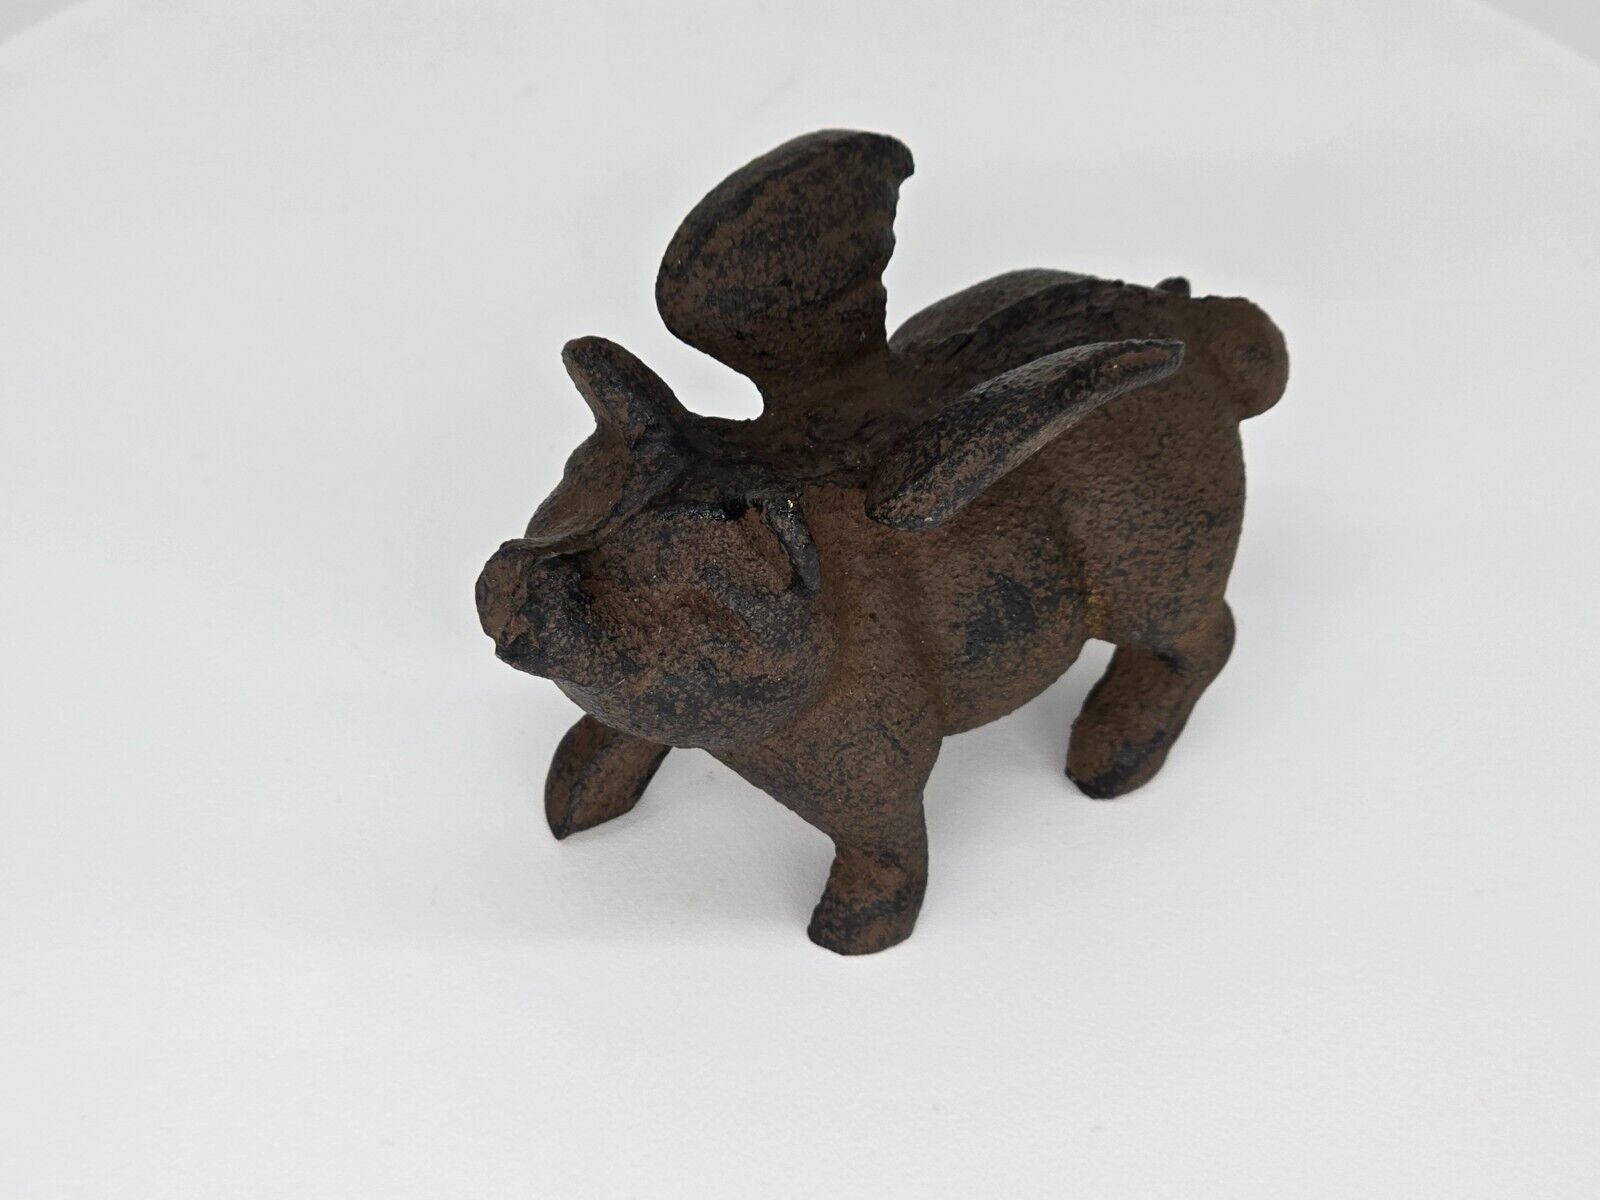 Rustic Cast Iron Flying Pig Statue with Wings - Garden & Desk Decor